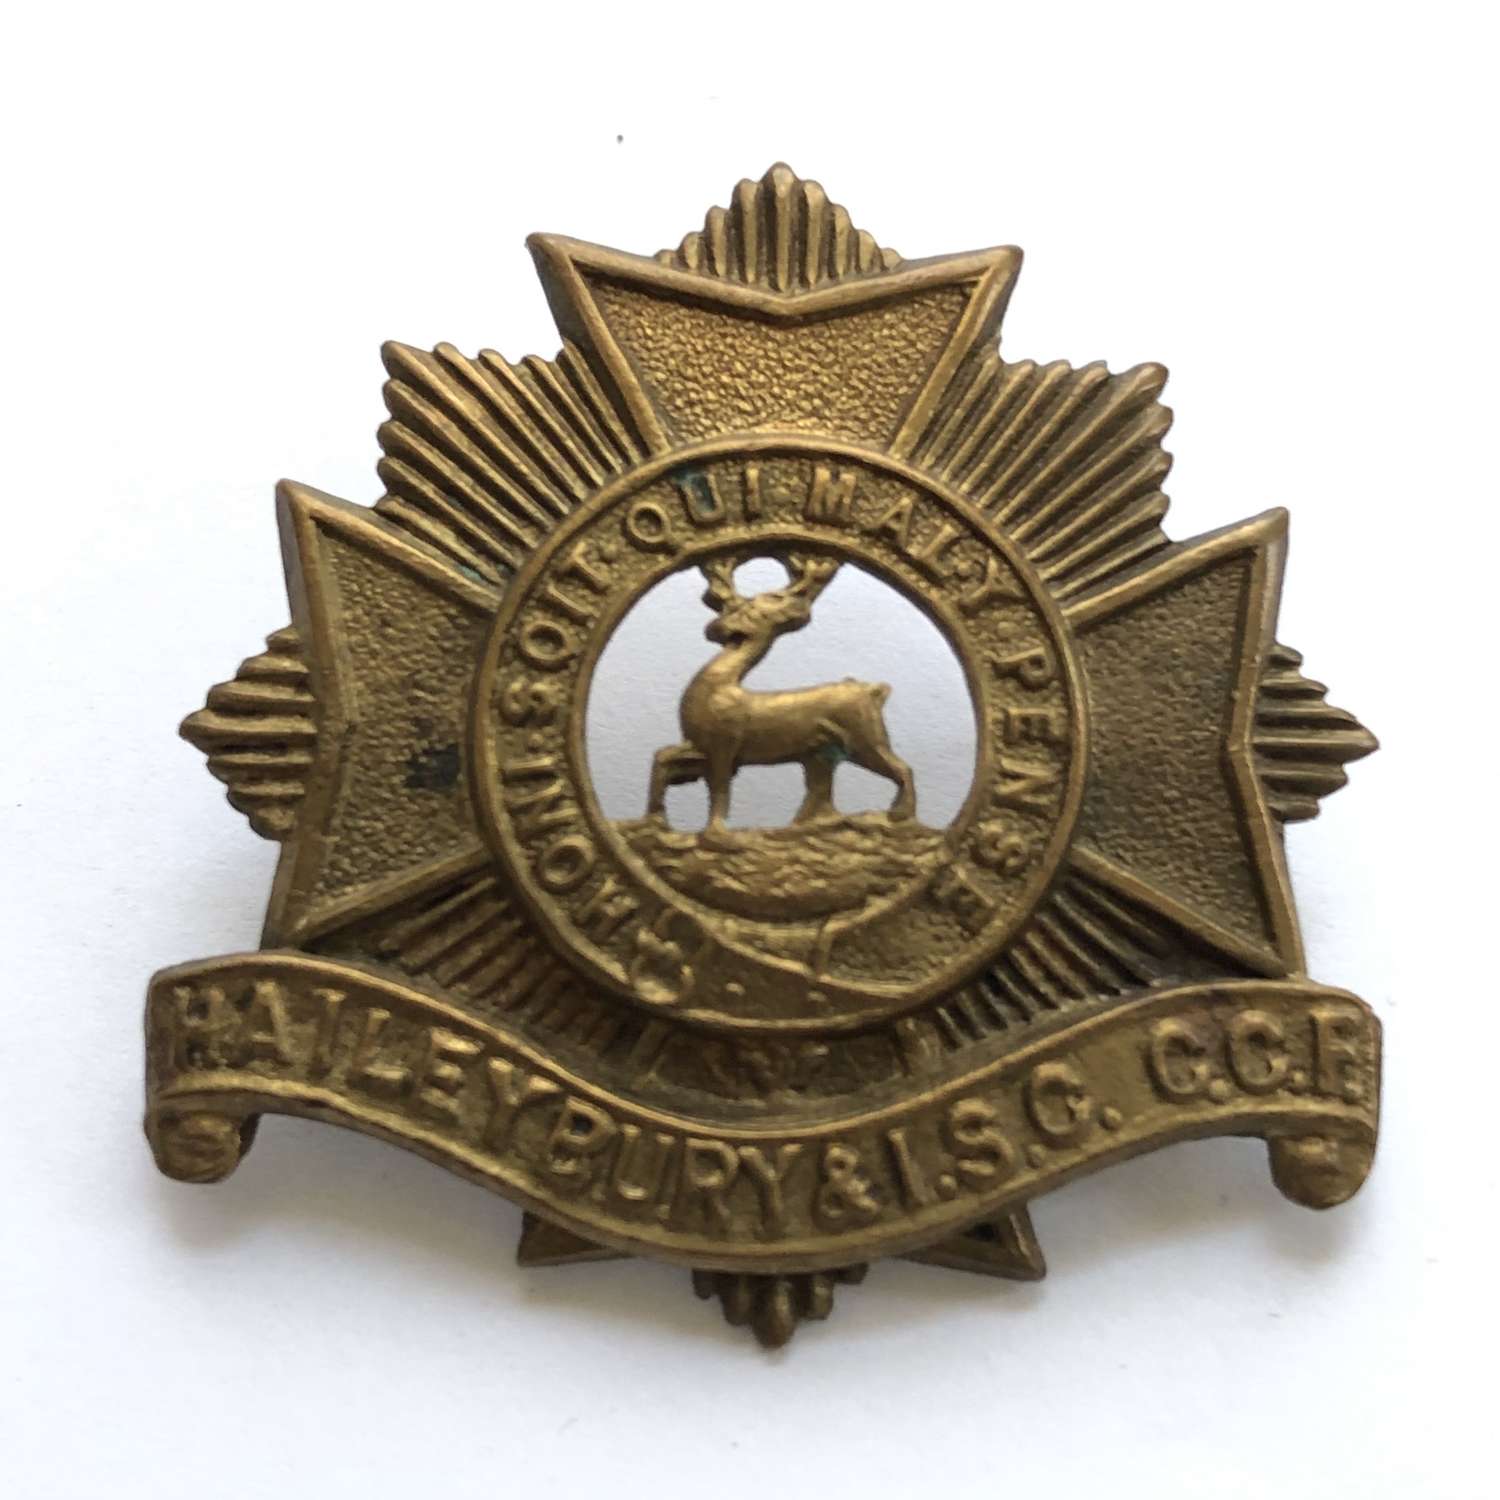 Haileybury and Imperial Service College CCF, Hertfordshire cap badge